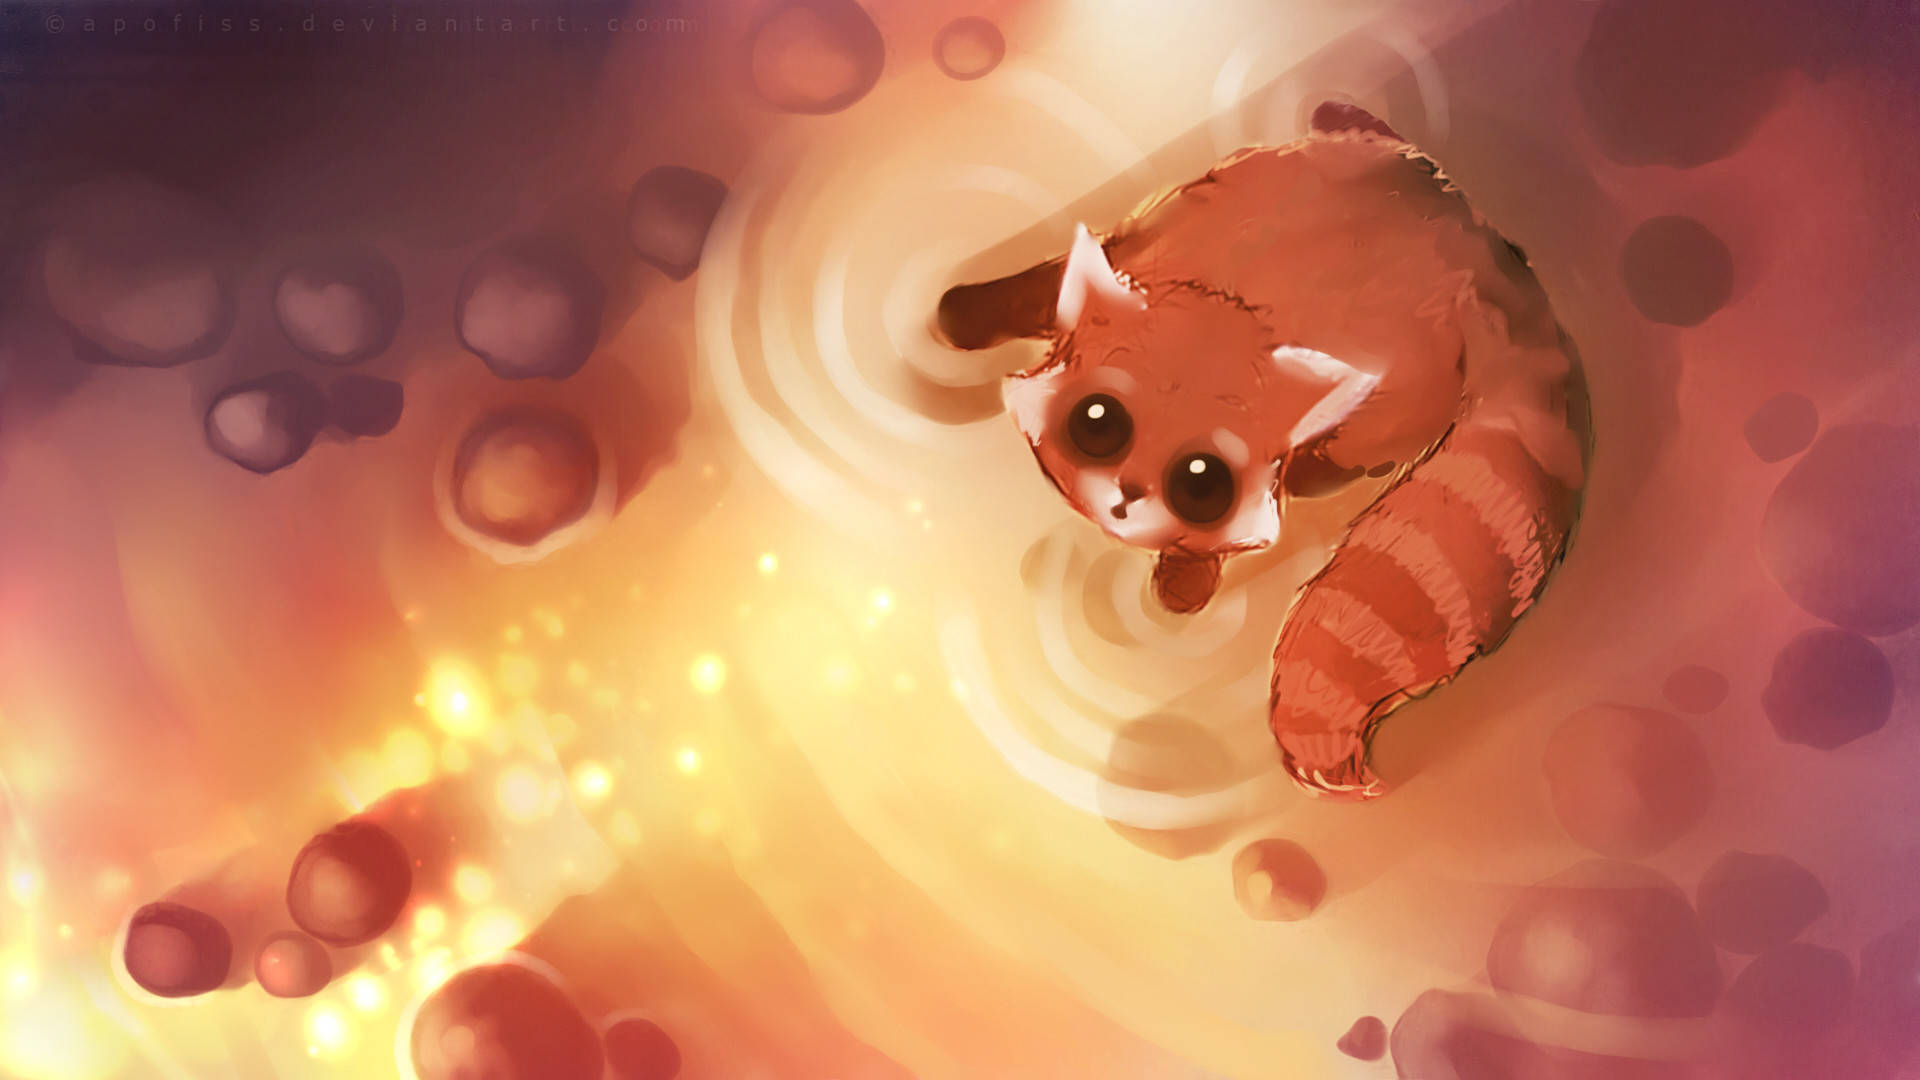 Download Cute Fox With Big Eyes Wallpaper 